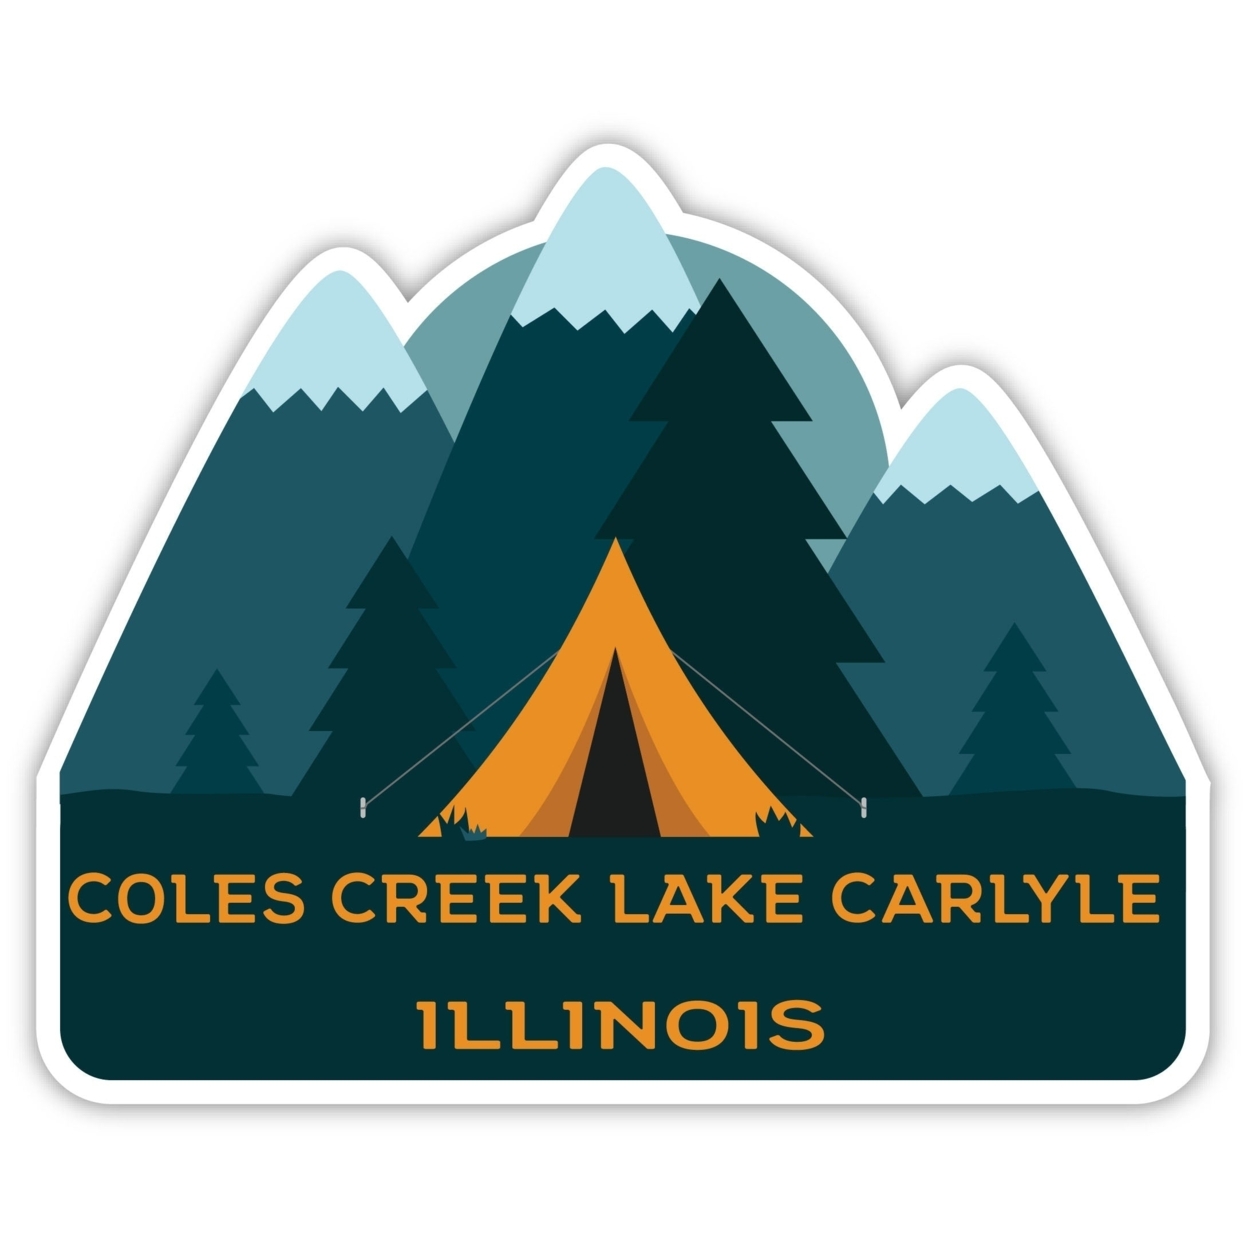 Coles Creek Lake Carlyle Illinois Souvenir Decorative Stickers (Choose Theme And Size) - 4-Pack, 10-Inch, Tent